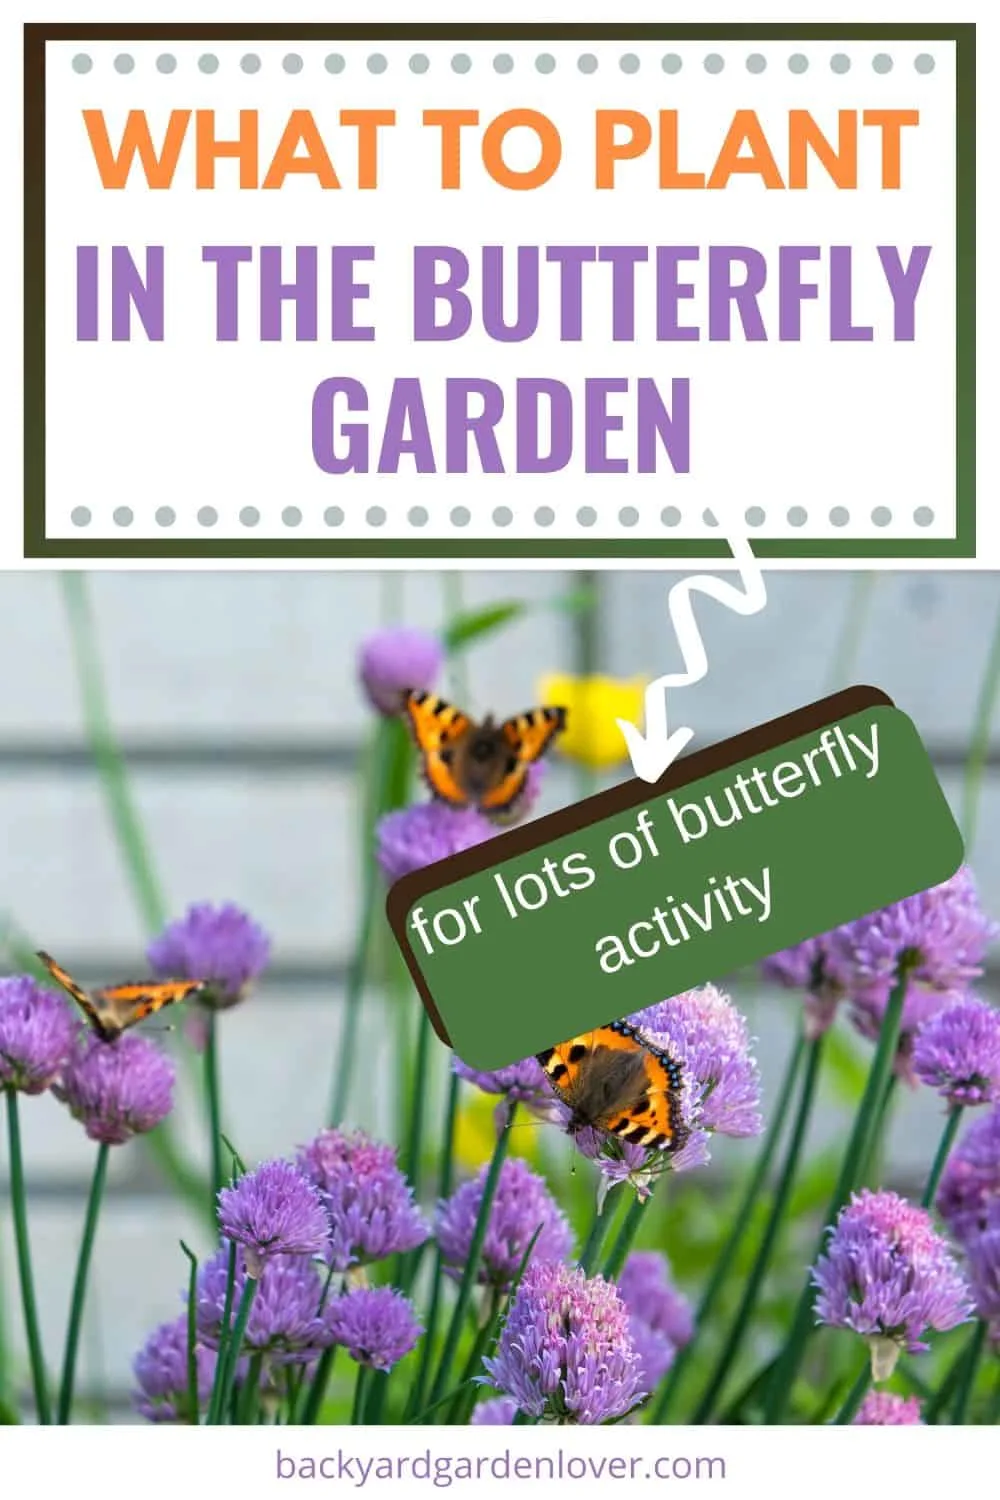 What to plant in the butterfly garden